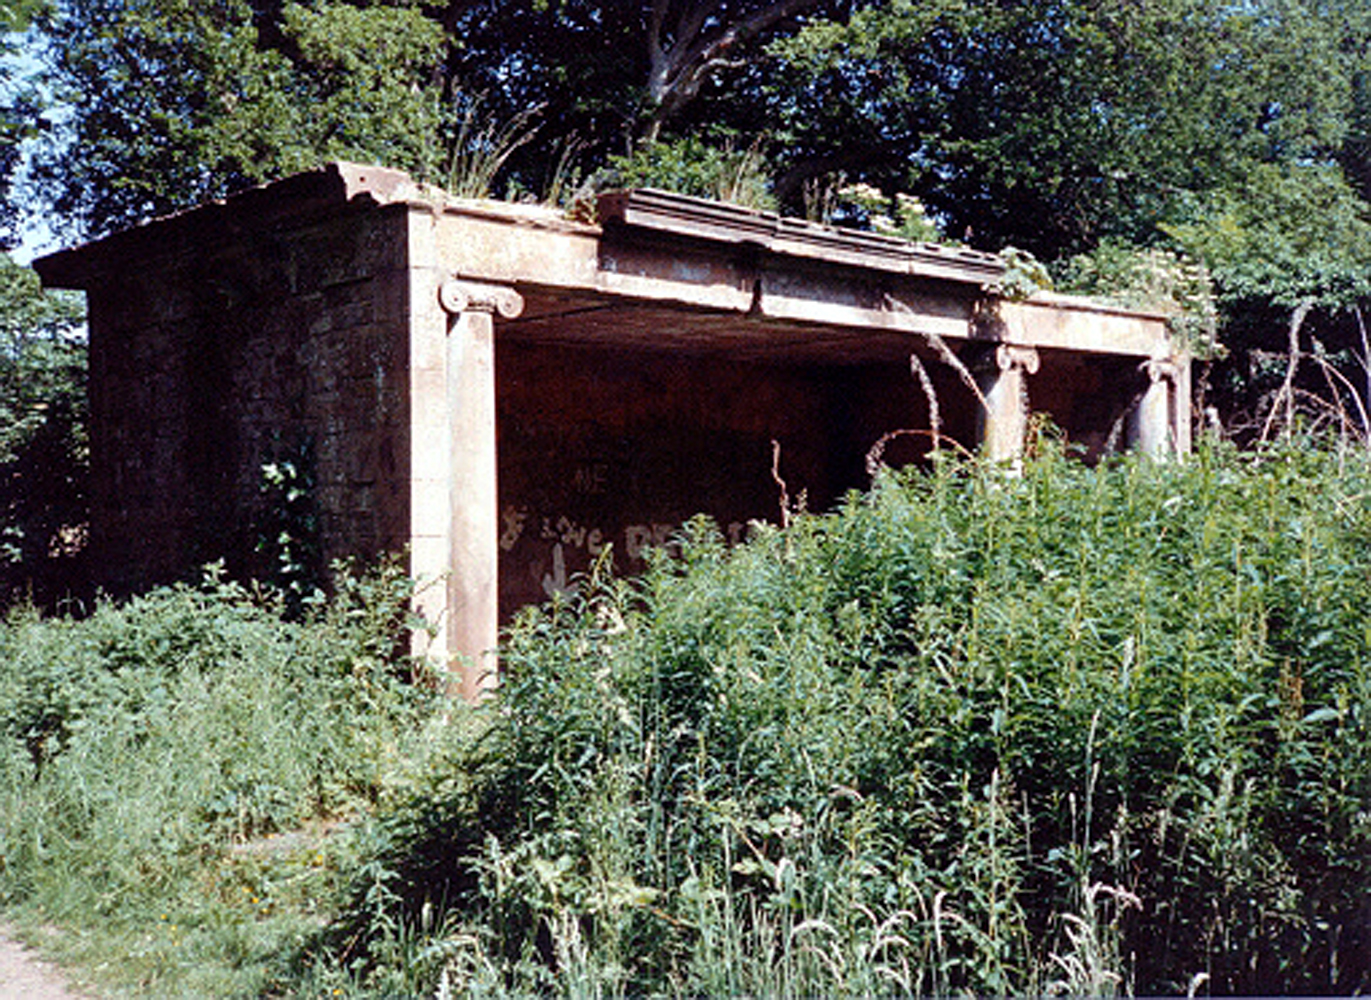 Netherhall garden portico room unkempt and disused and overgrown July 1992